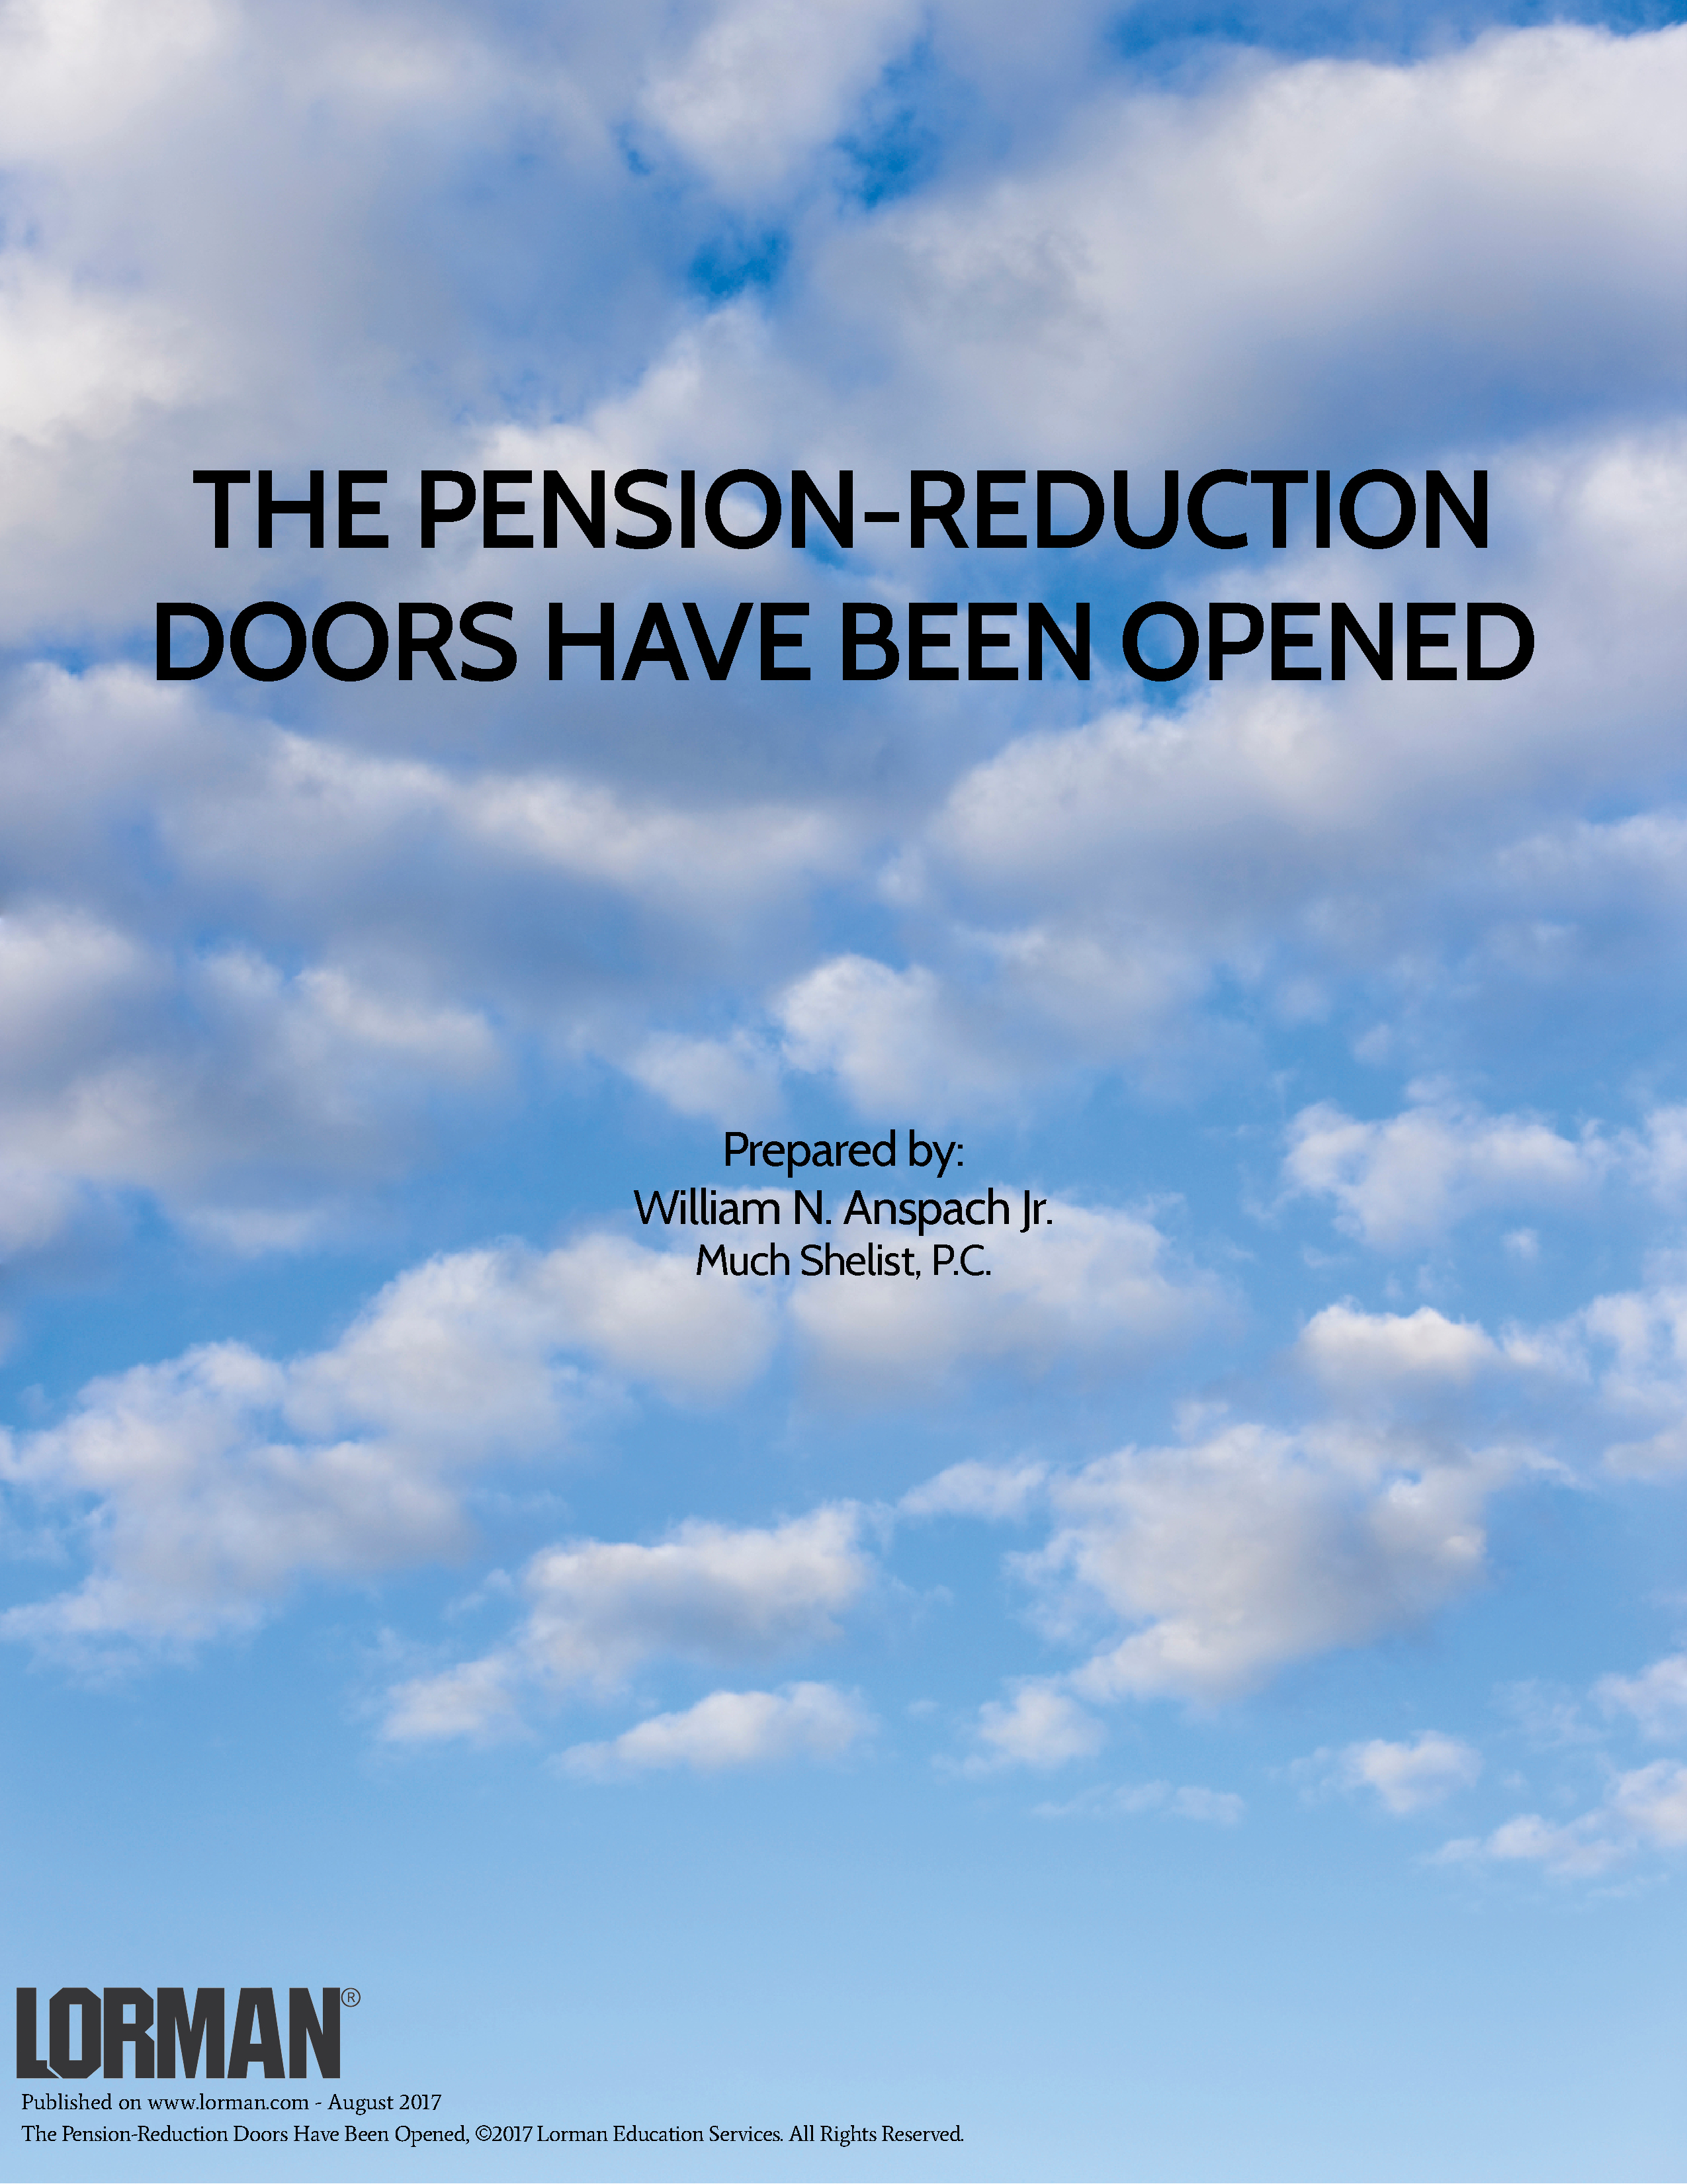 The Pension-Reduction Doors Have Been Opened